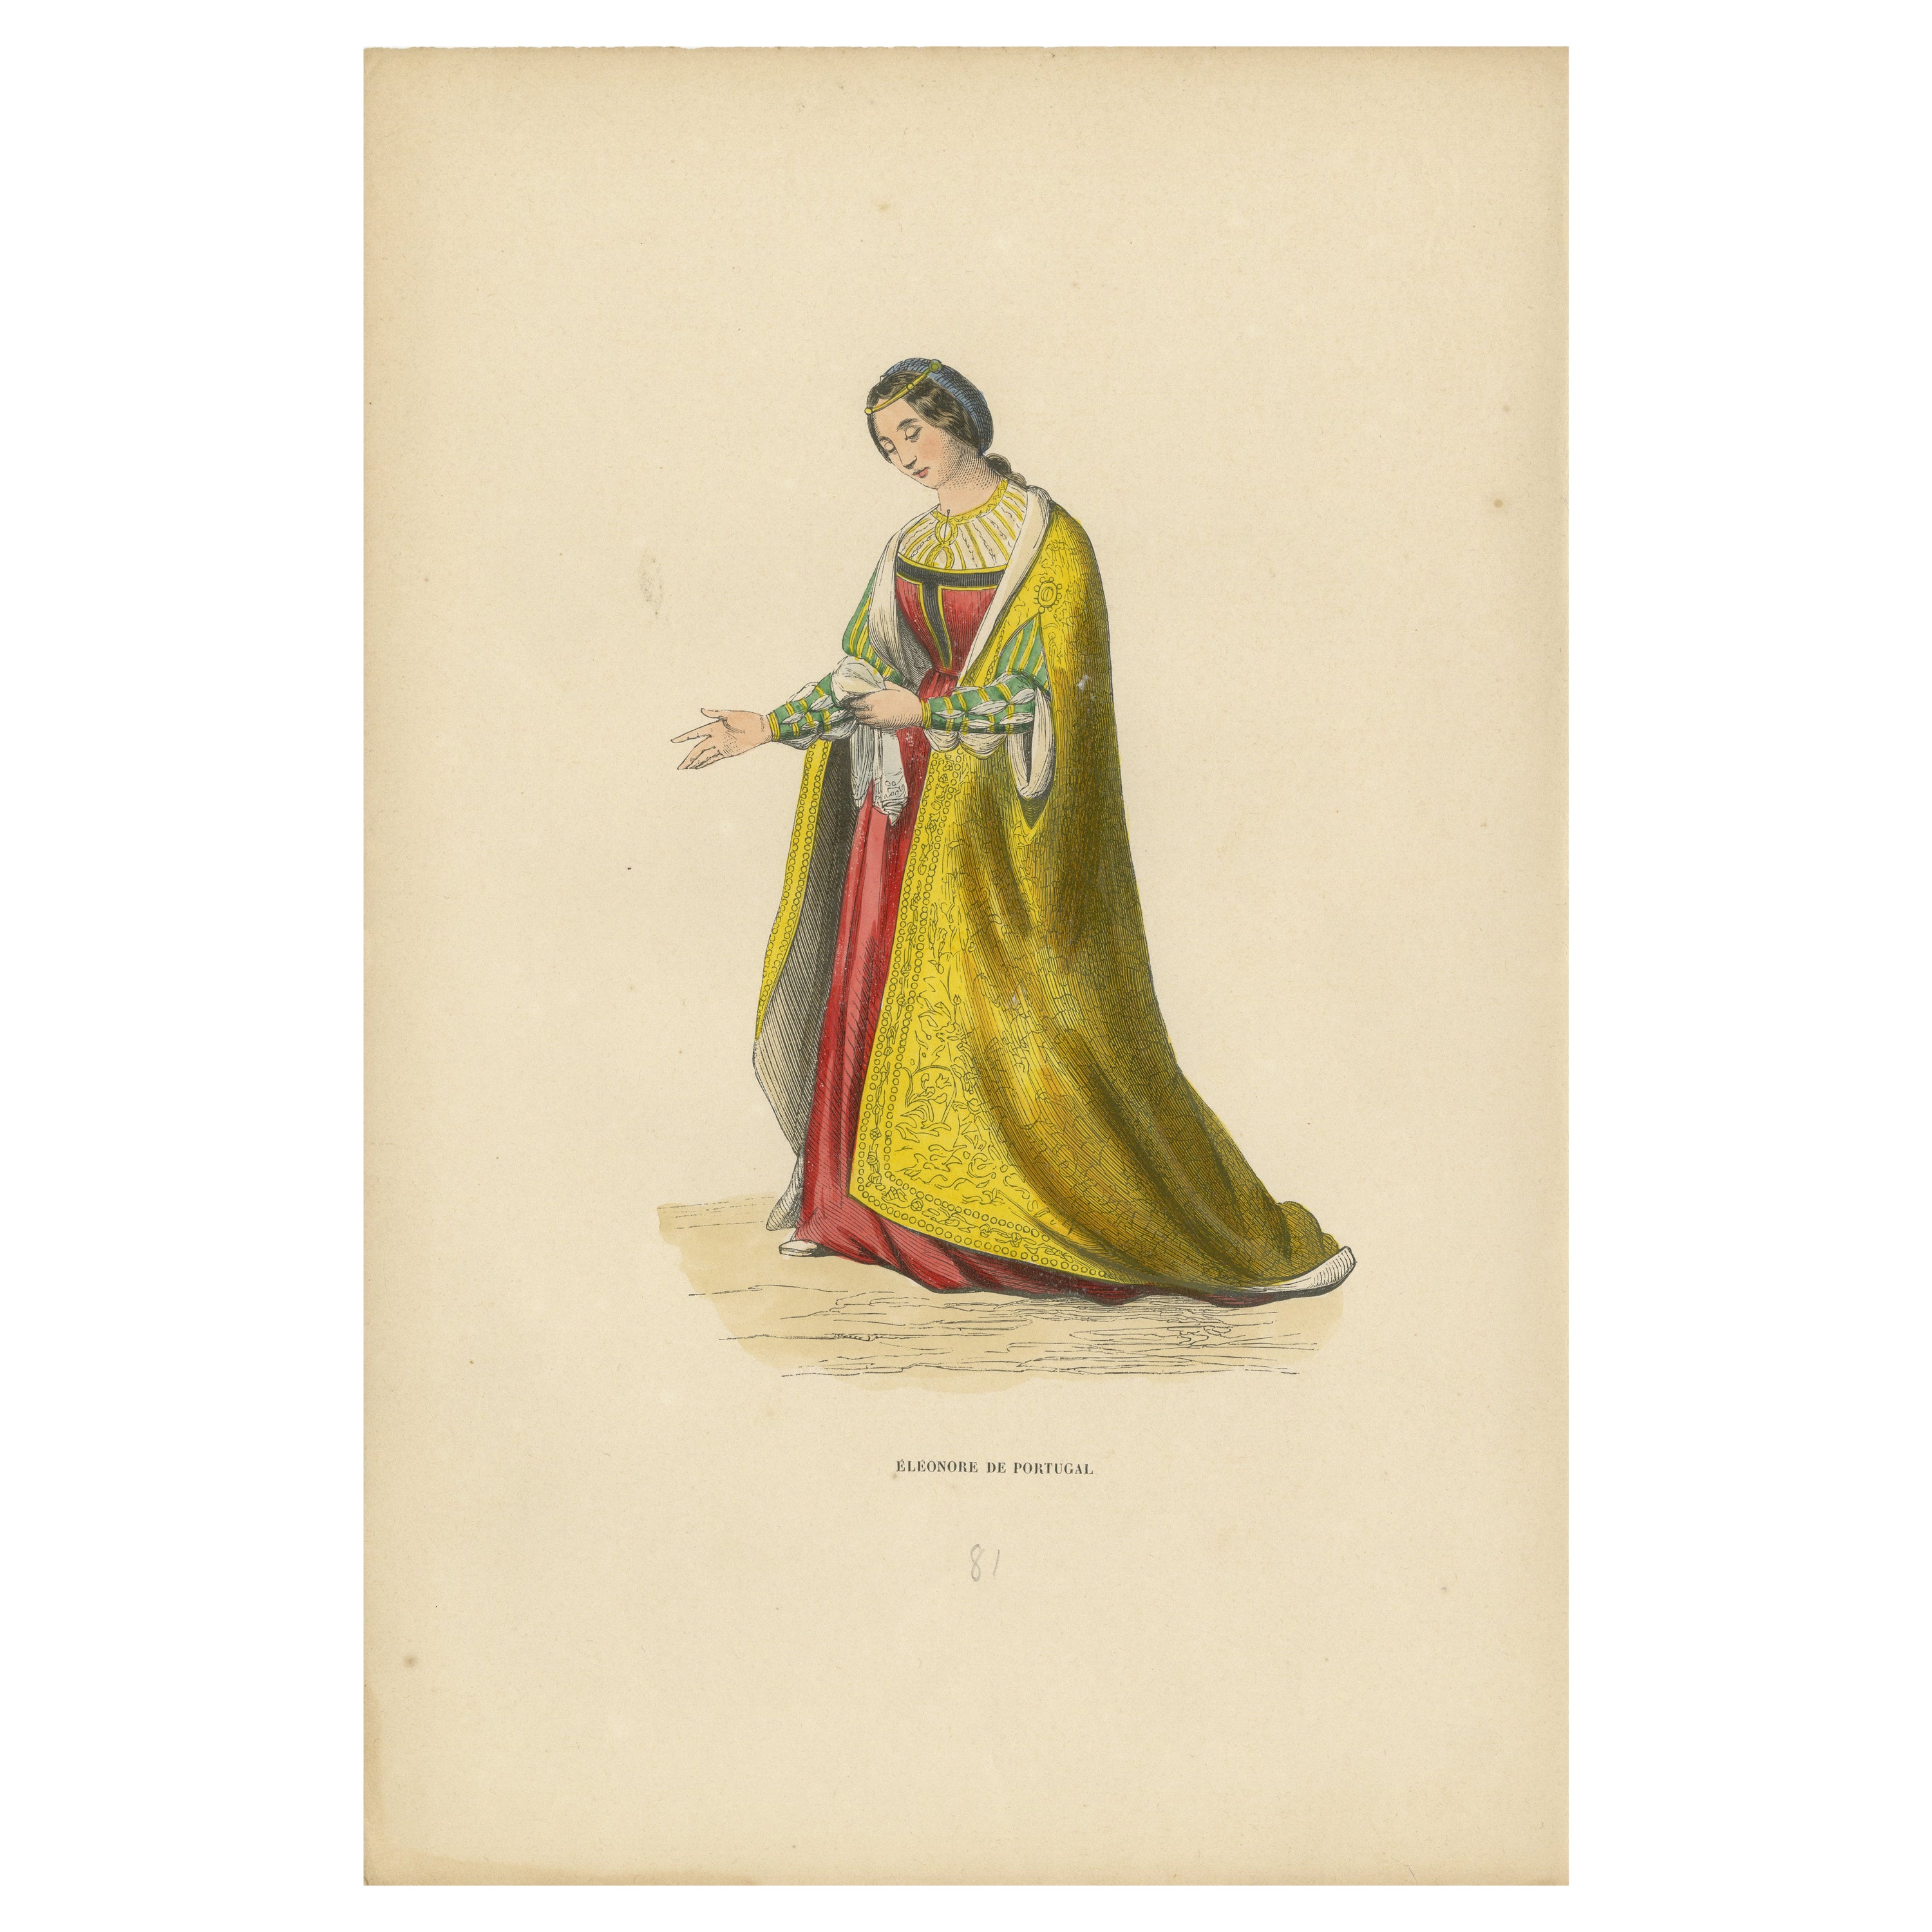 Eleanor of Portugal: Regal and Resplendent, Original Old Print Published in 1847 For Sale